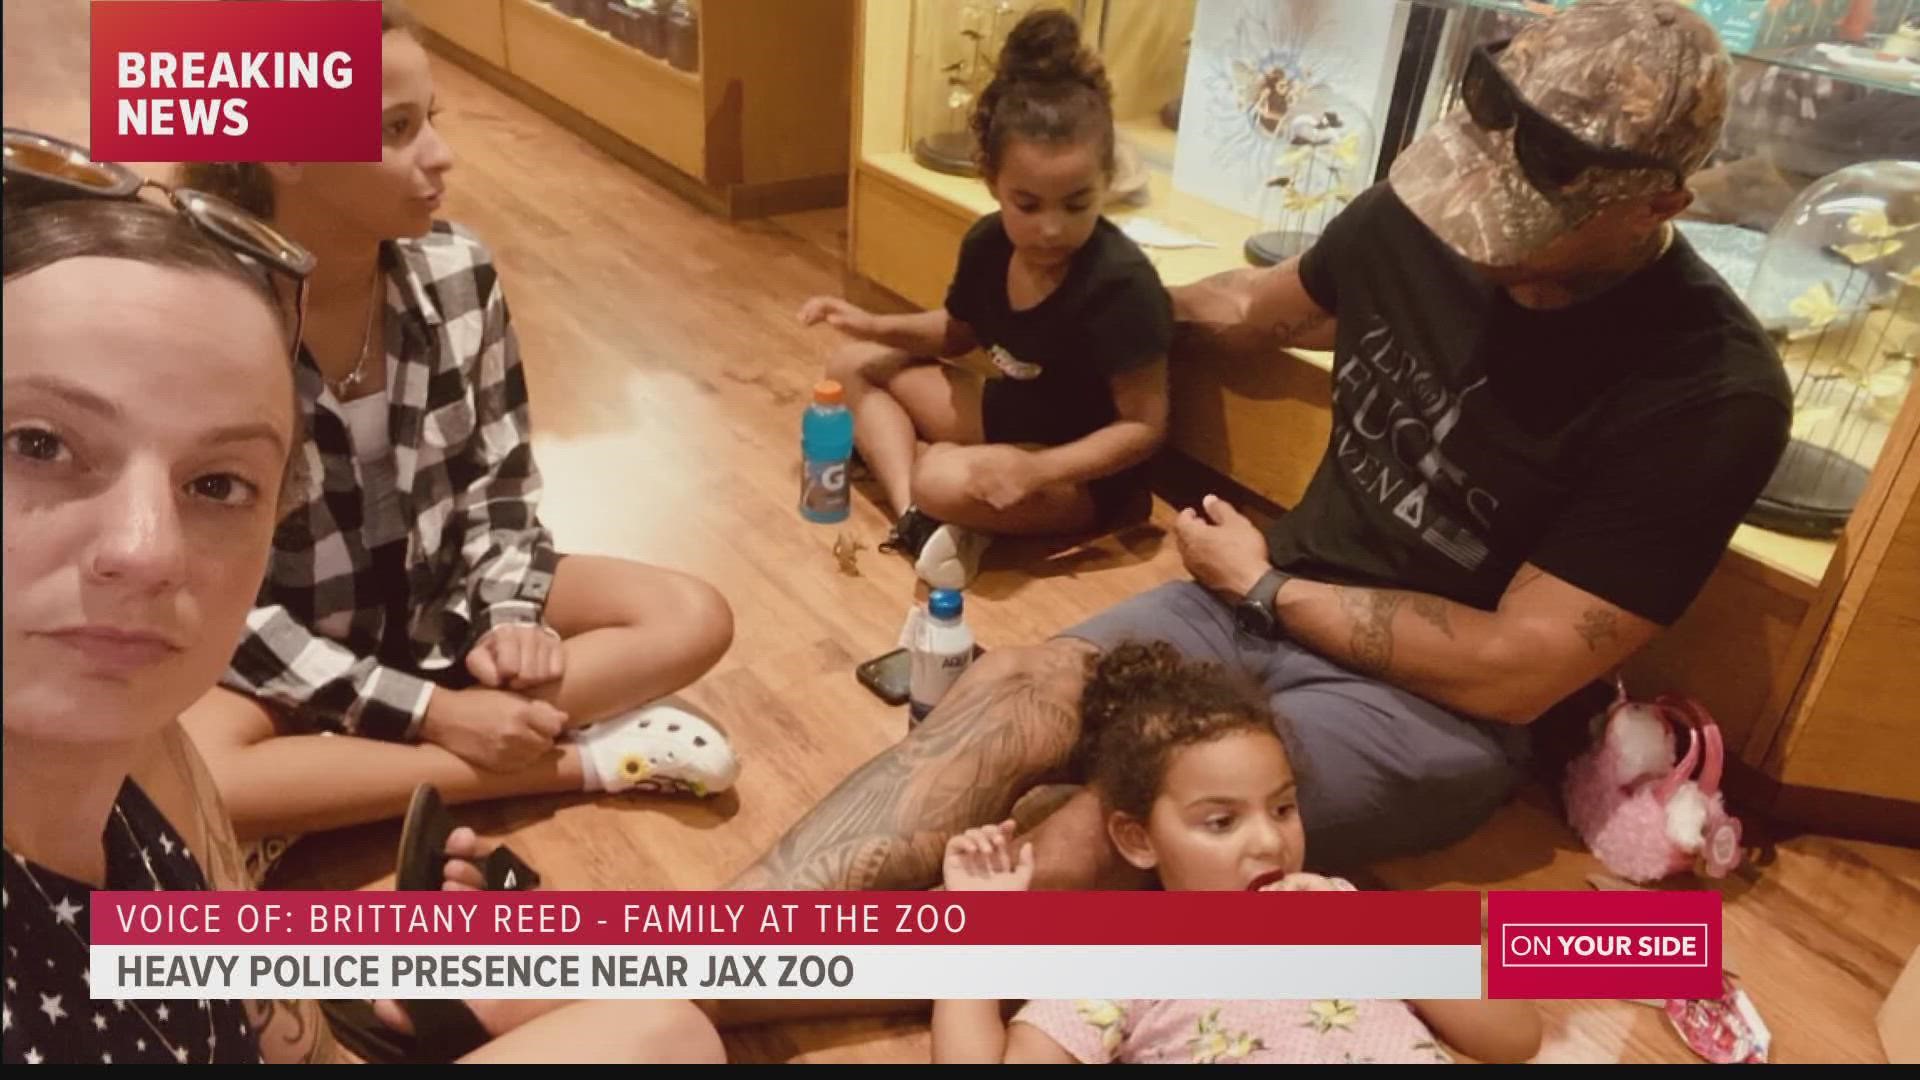 An officer-involved incident near the Jacksonville Zoo and Gardens has prompted a shelter in place order from the Jacksonville Sheriff's Office.